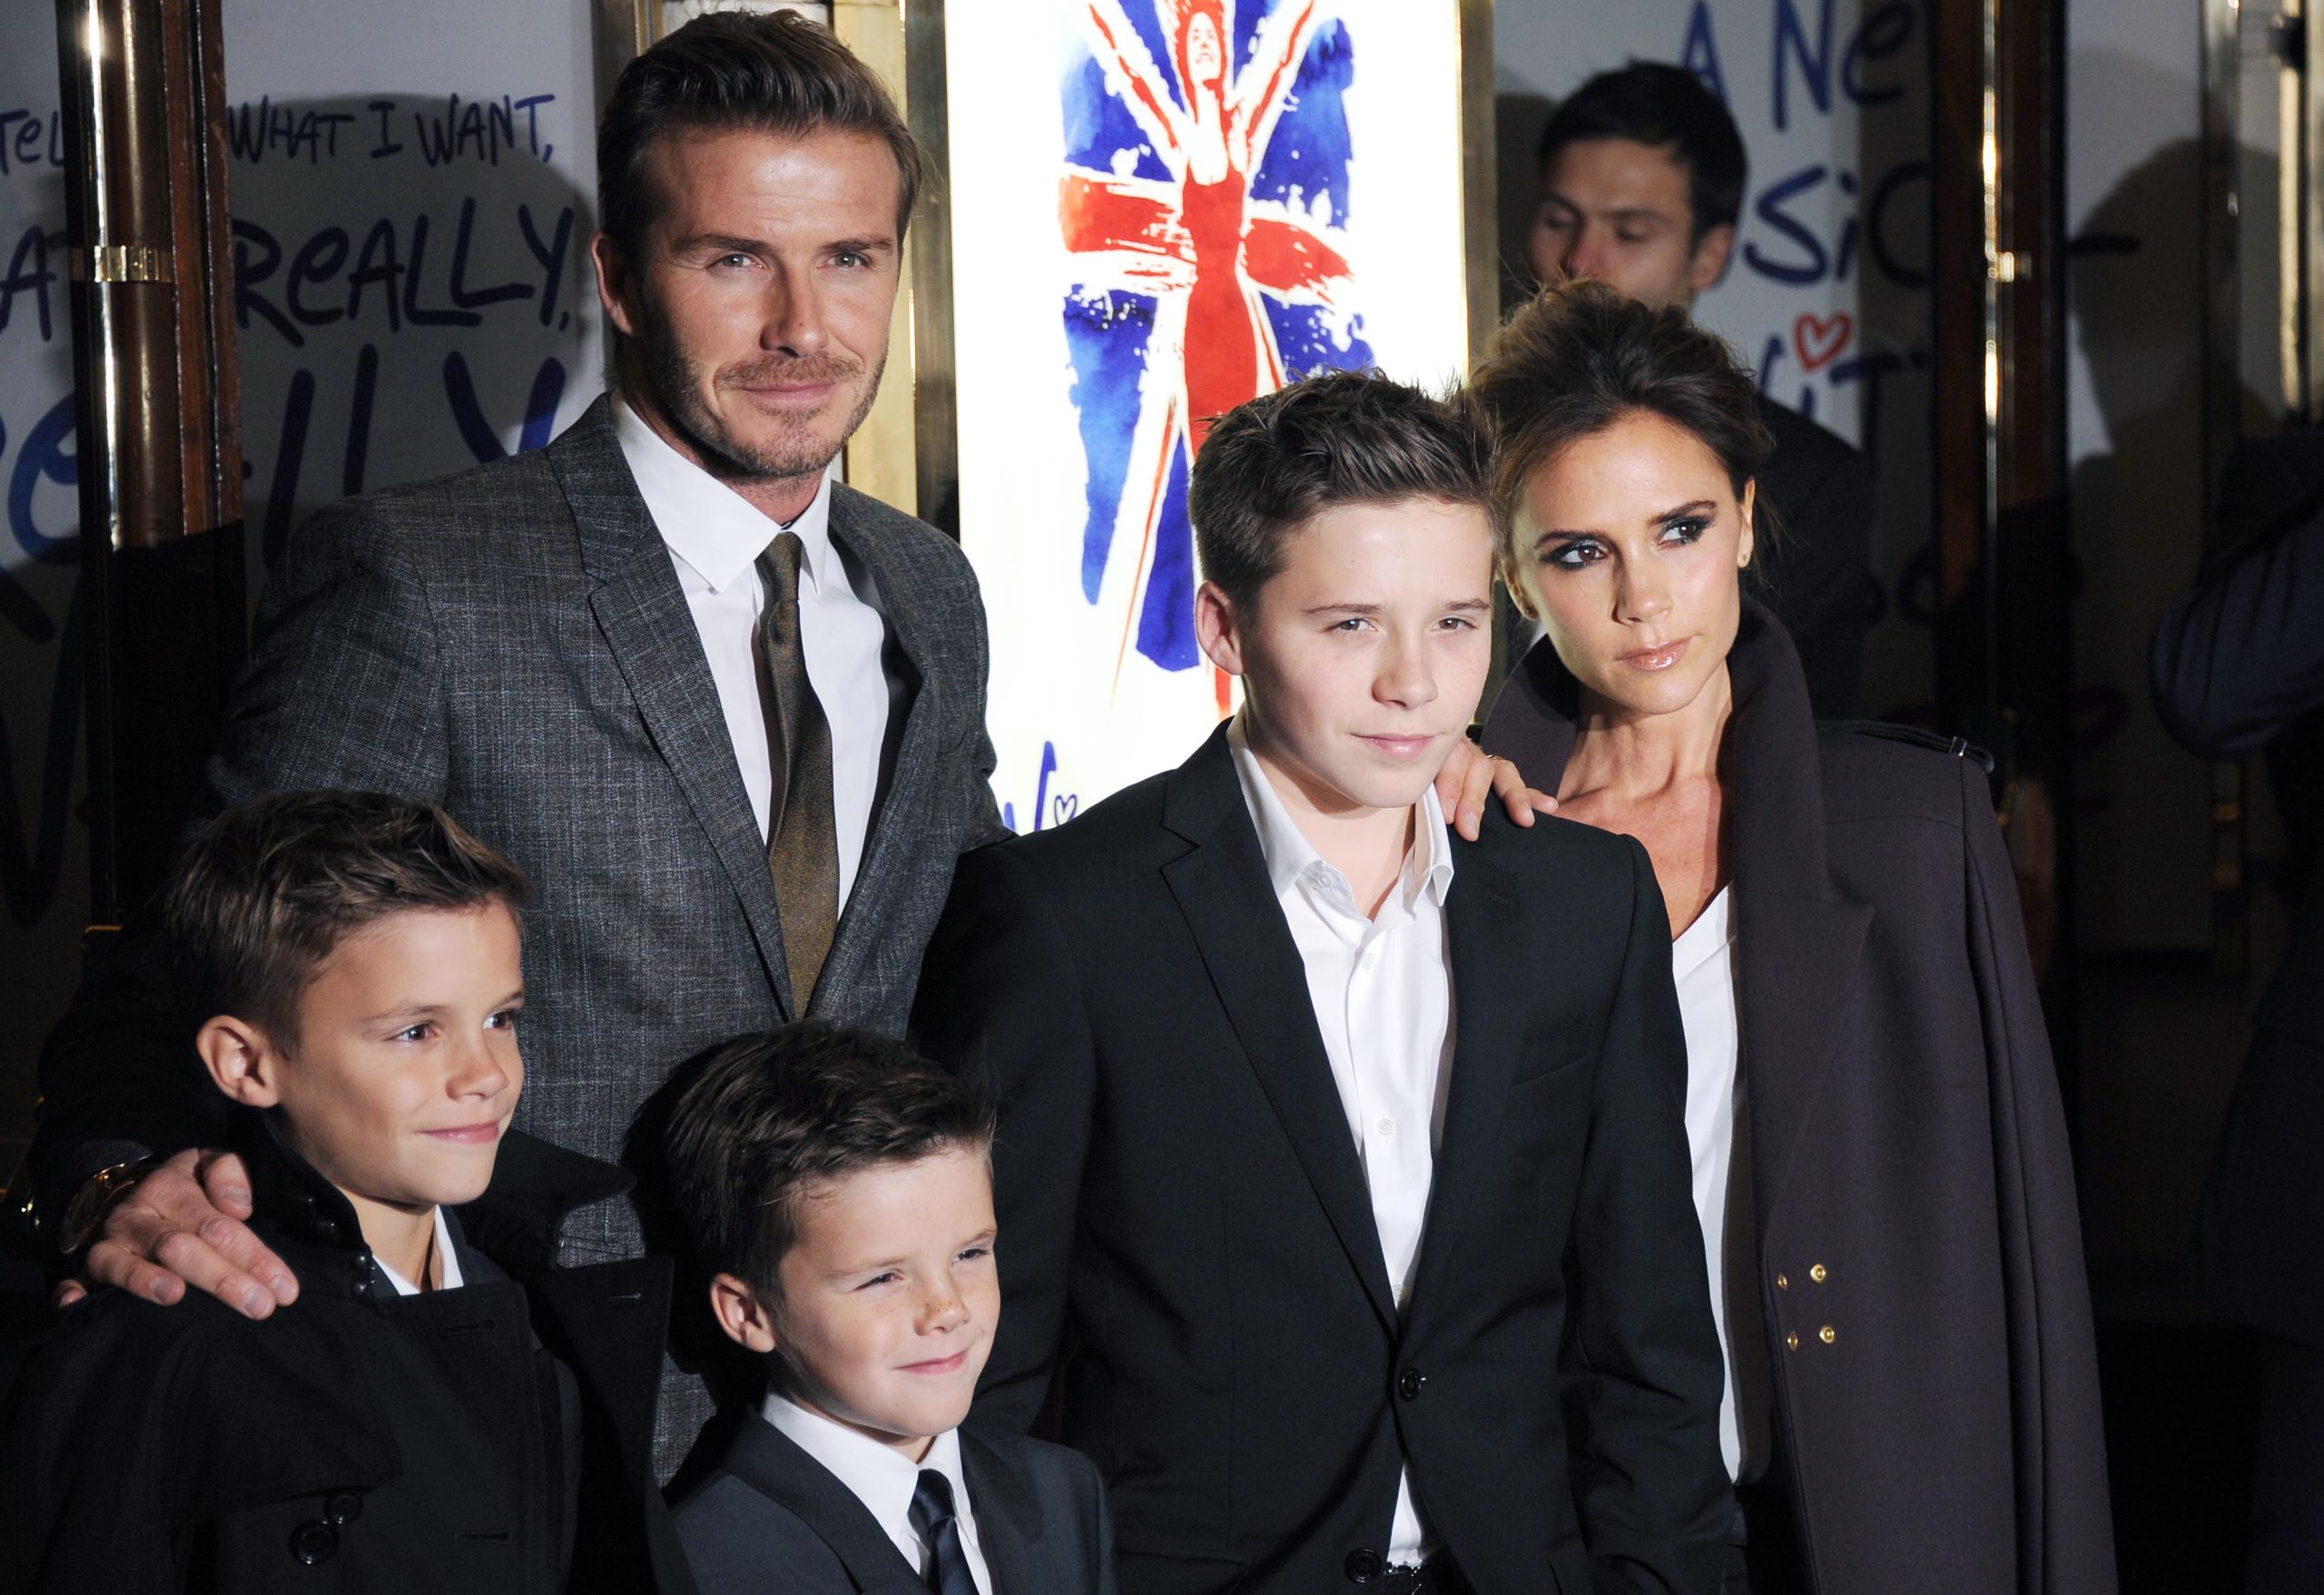 LONDON, UNITED KINGDOM - DECEMBER 11: Romeo Beckham, David Beckham, Cruz Beckham, Brooklyn Beckham and Victoria Beckham attend the press night of 'Viva Forever', a musical based on the music of The Spice Girls at Piccadilly Theatre on December 11, 2012 in London, England. (Photo by Stuart Wilson/Getty Images)